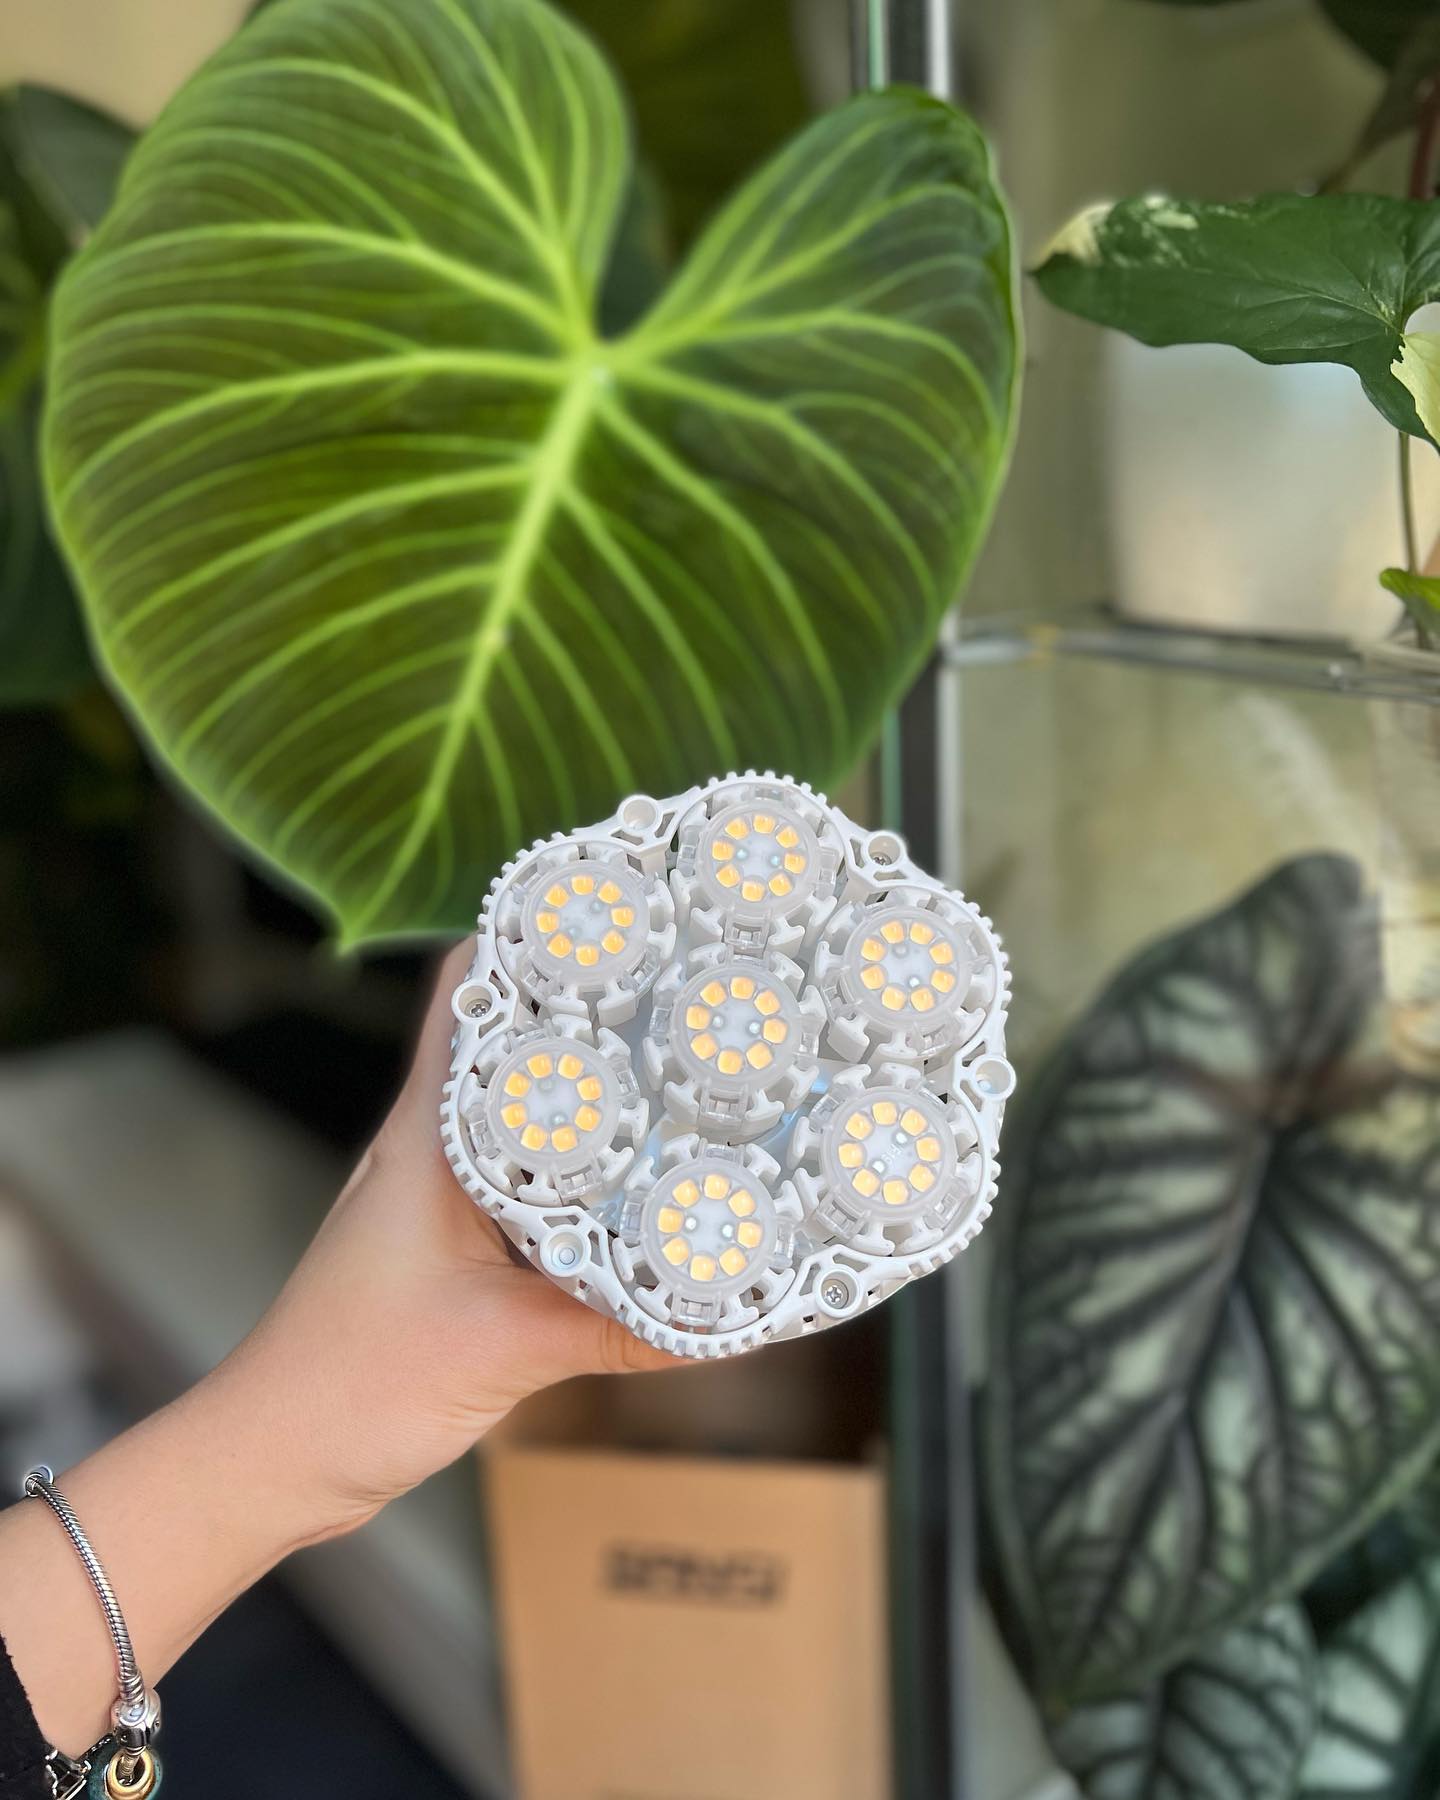 A photo shared by an influencer @mood4plants on INS，she is holding a 36W LED plant grow bulb and can clearly see the structure of the bulb bead.